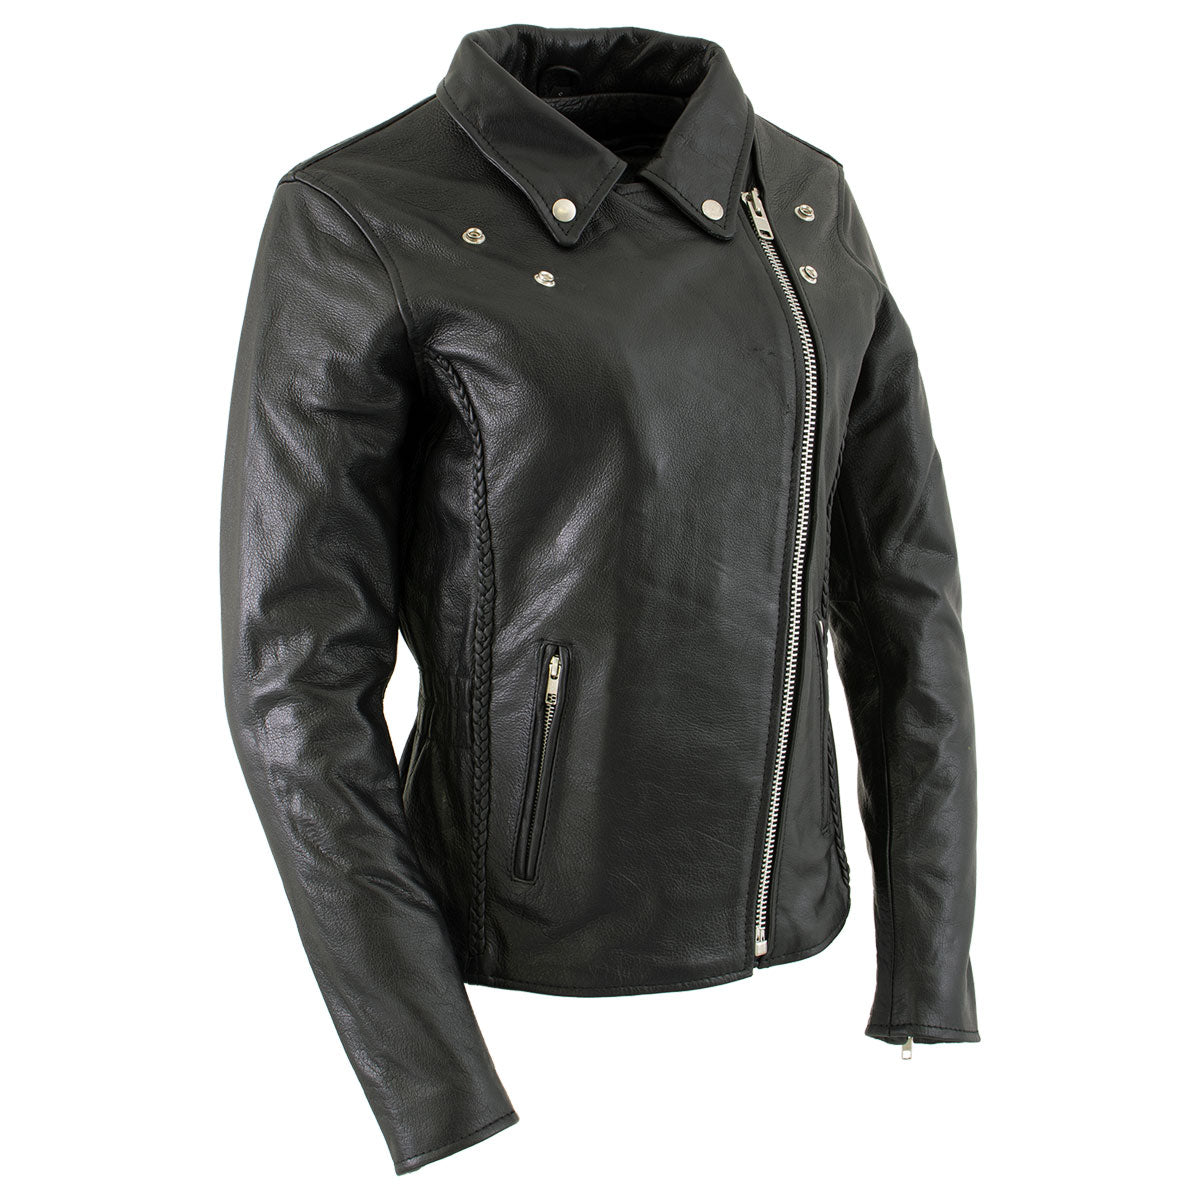 Xelement B8000 Women's Black 'Classic Braided' Fitted Motorycle Jacket